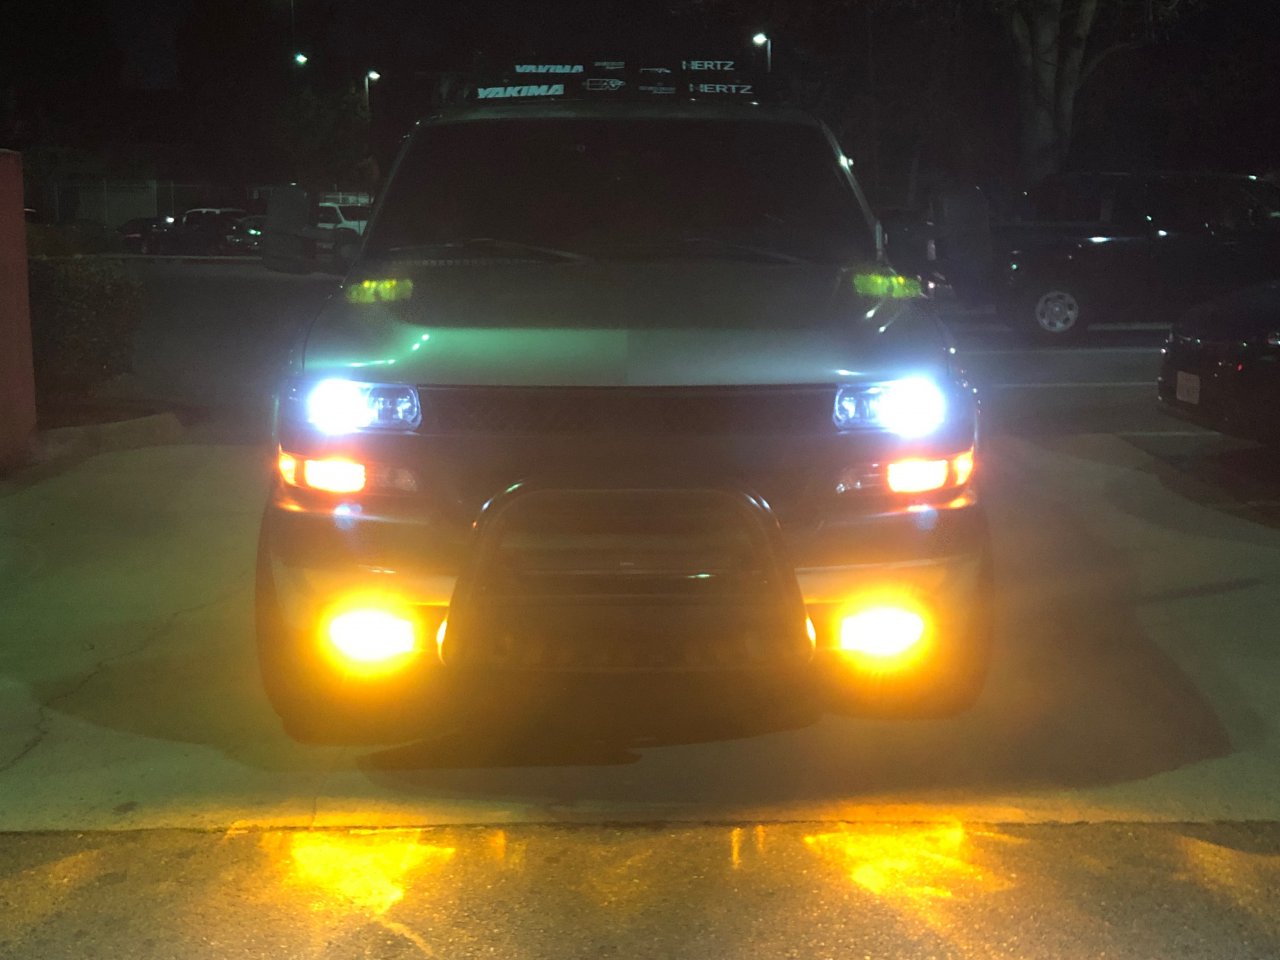 HIDs in Projectors and HIDs in yellow tint housing